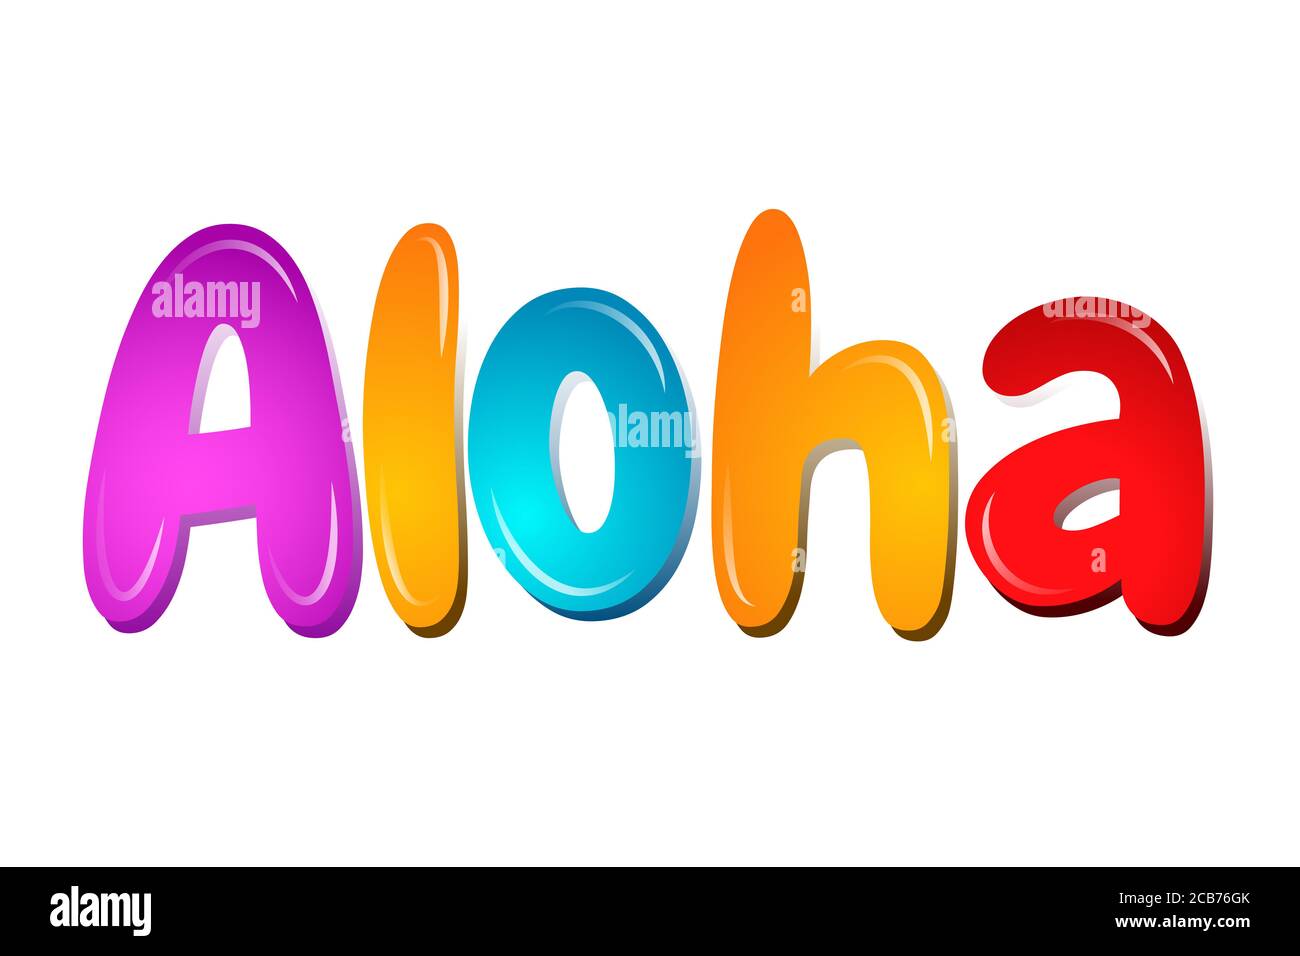 Aloha in cartoon colorful letters banner for kids Stock Photo